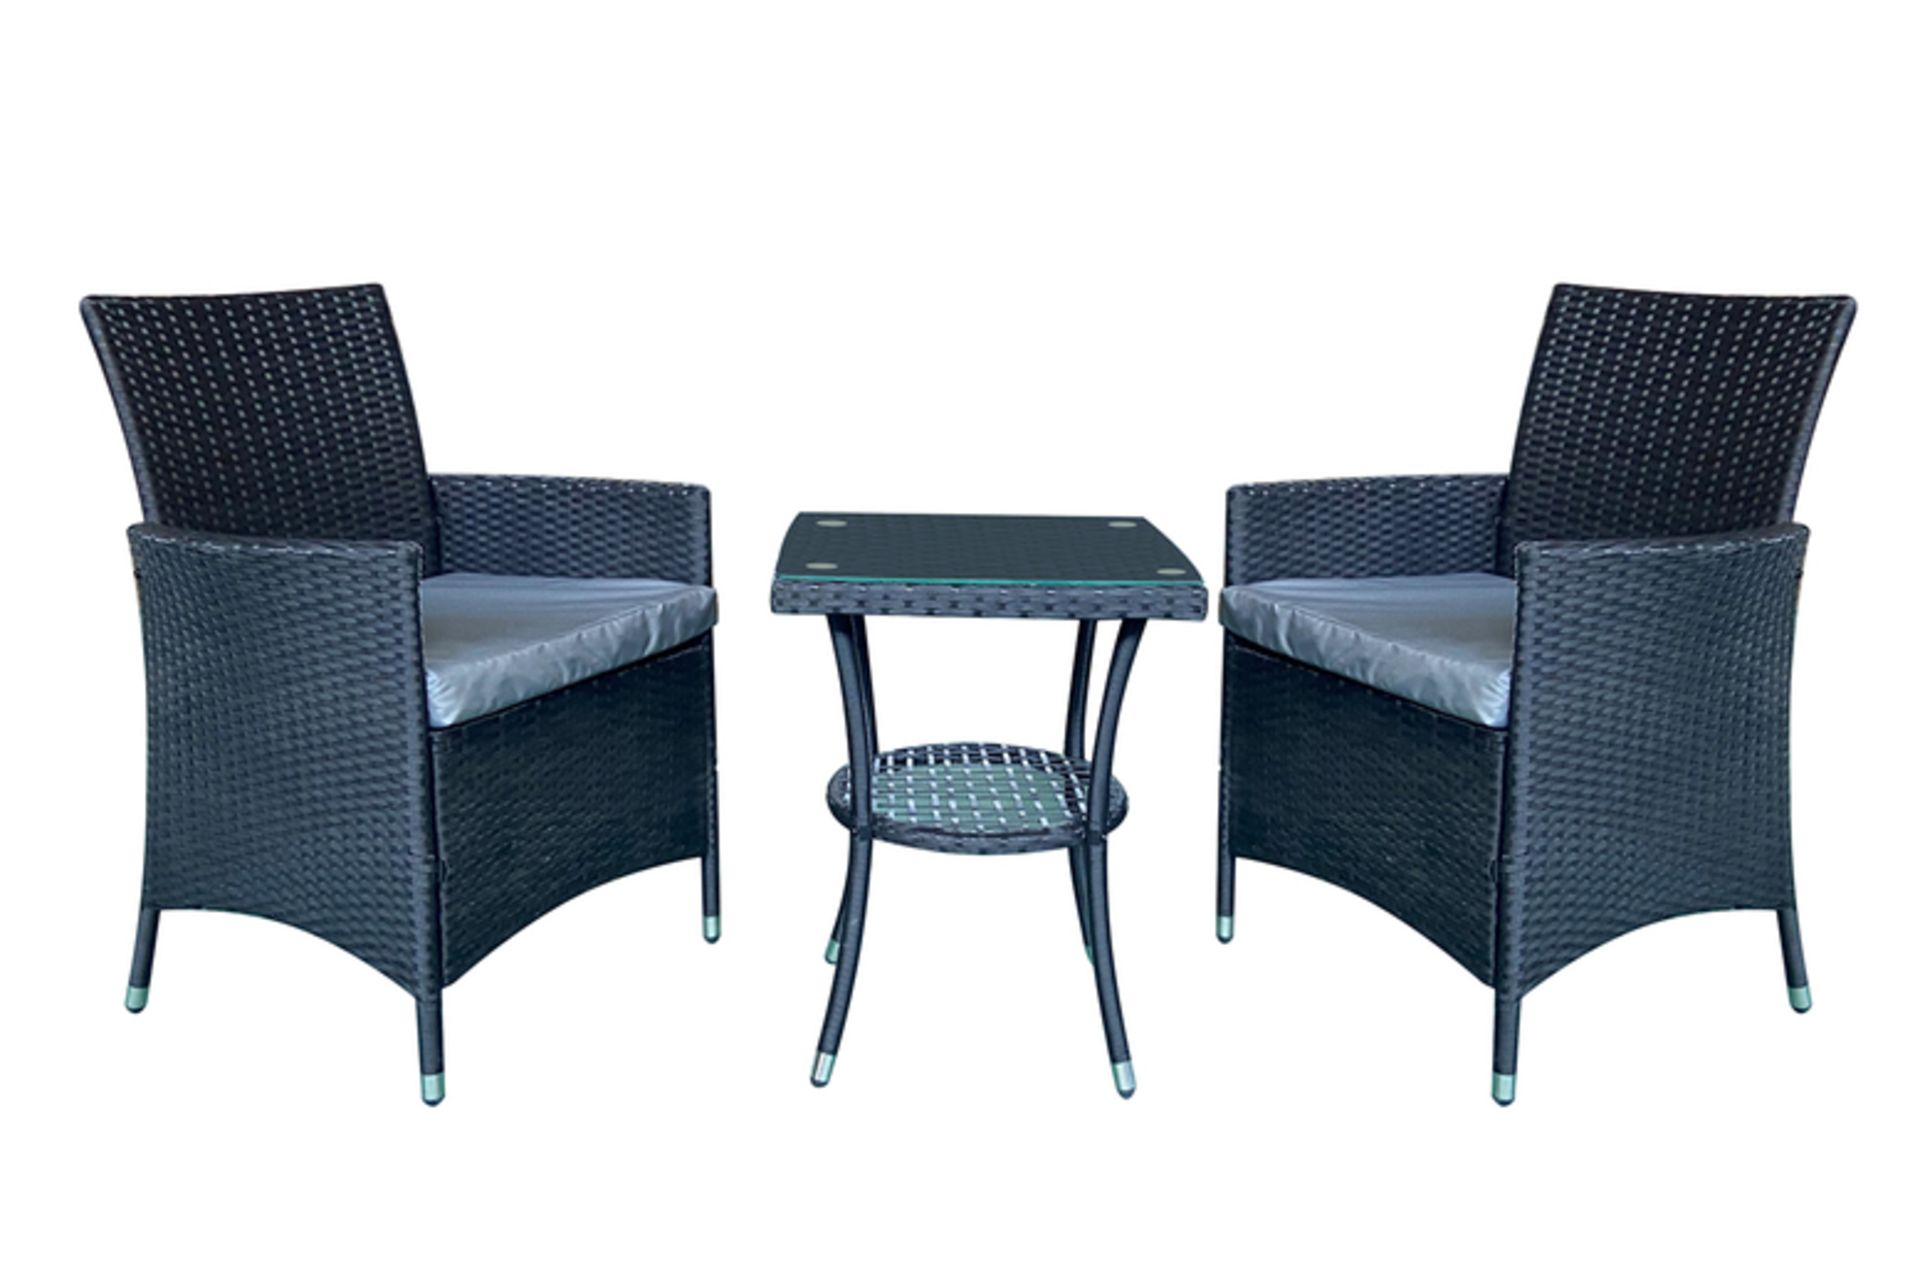 Free Delivery - 2-Seater Chiswick Rattan Bistro Set - Black - Image 2 of 3